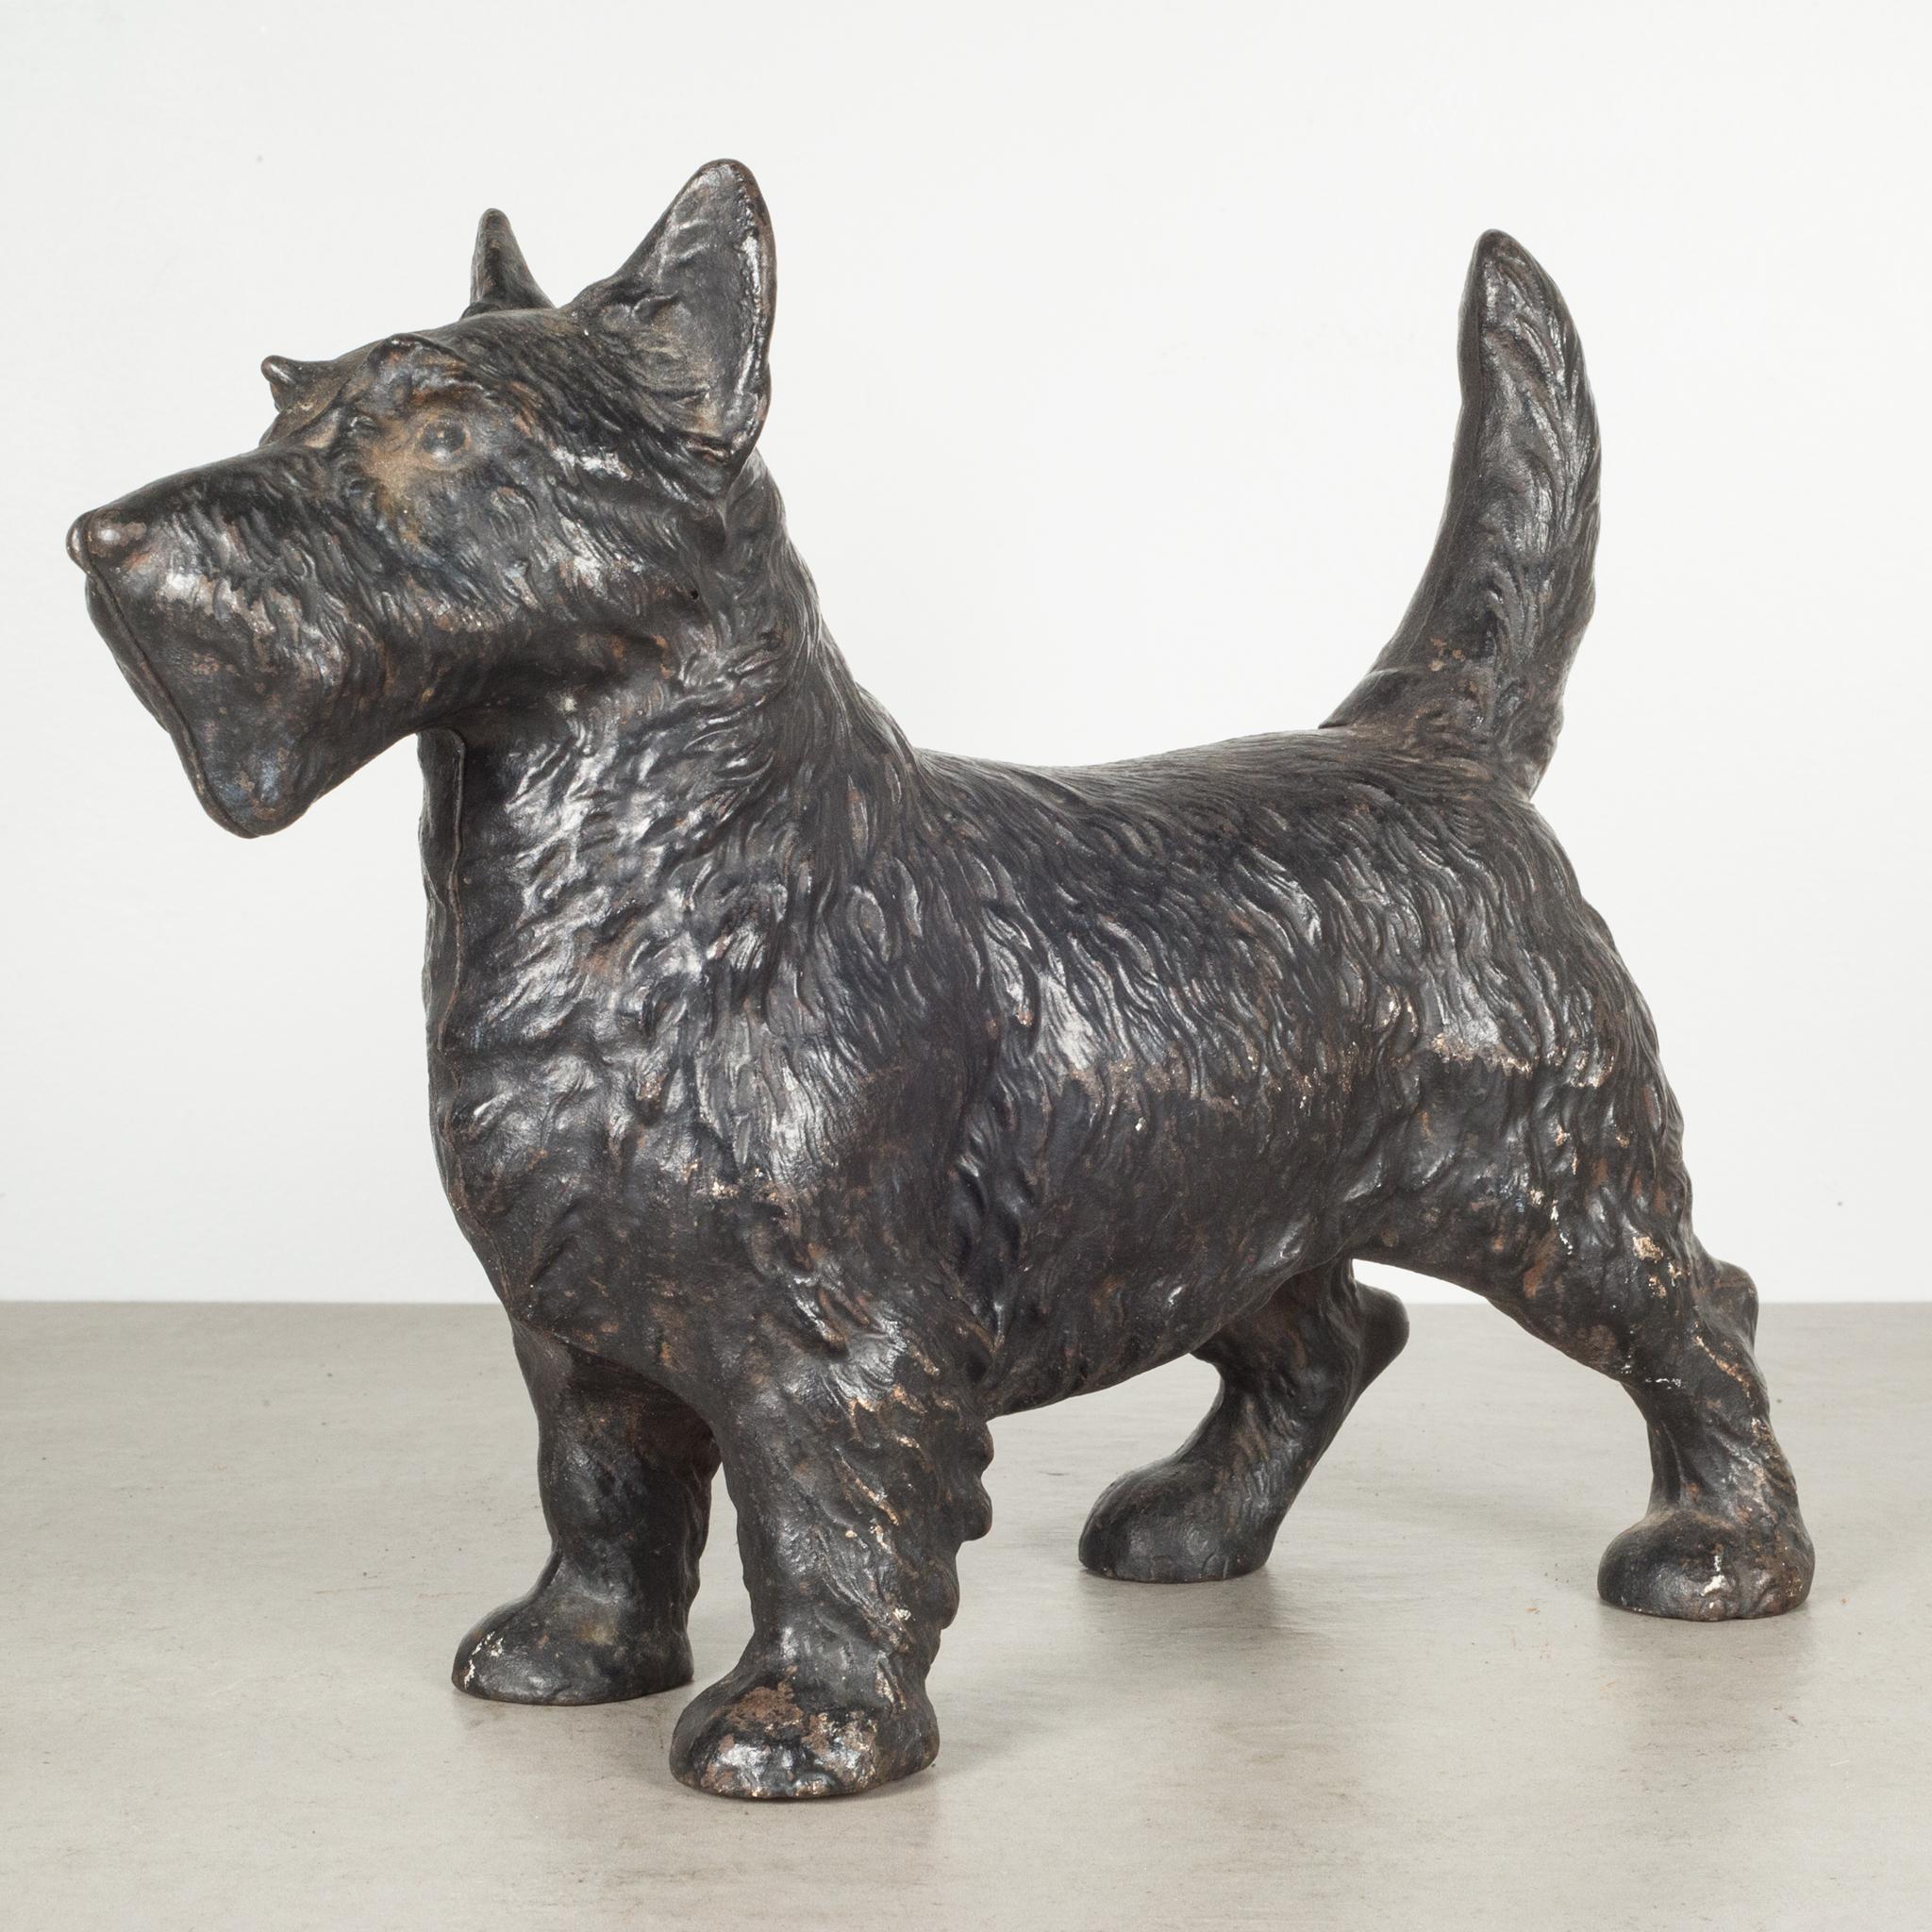 This is an original cast iron Scottish Terrier doorstop manufactured by the Hubley Manufacturing Company in Lancaster Pennsylvania USA. The piece has retained its original hand painted finish and is in excellent condition with the appropriate patina